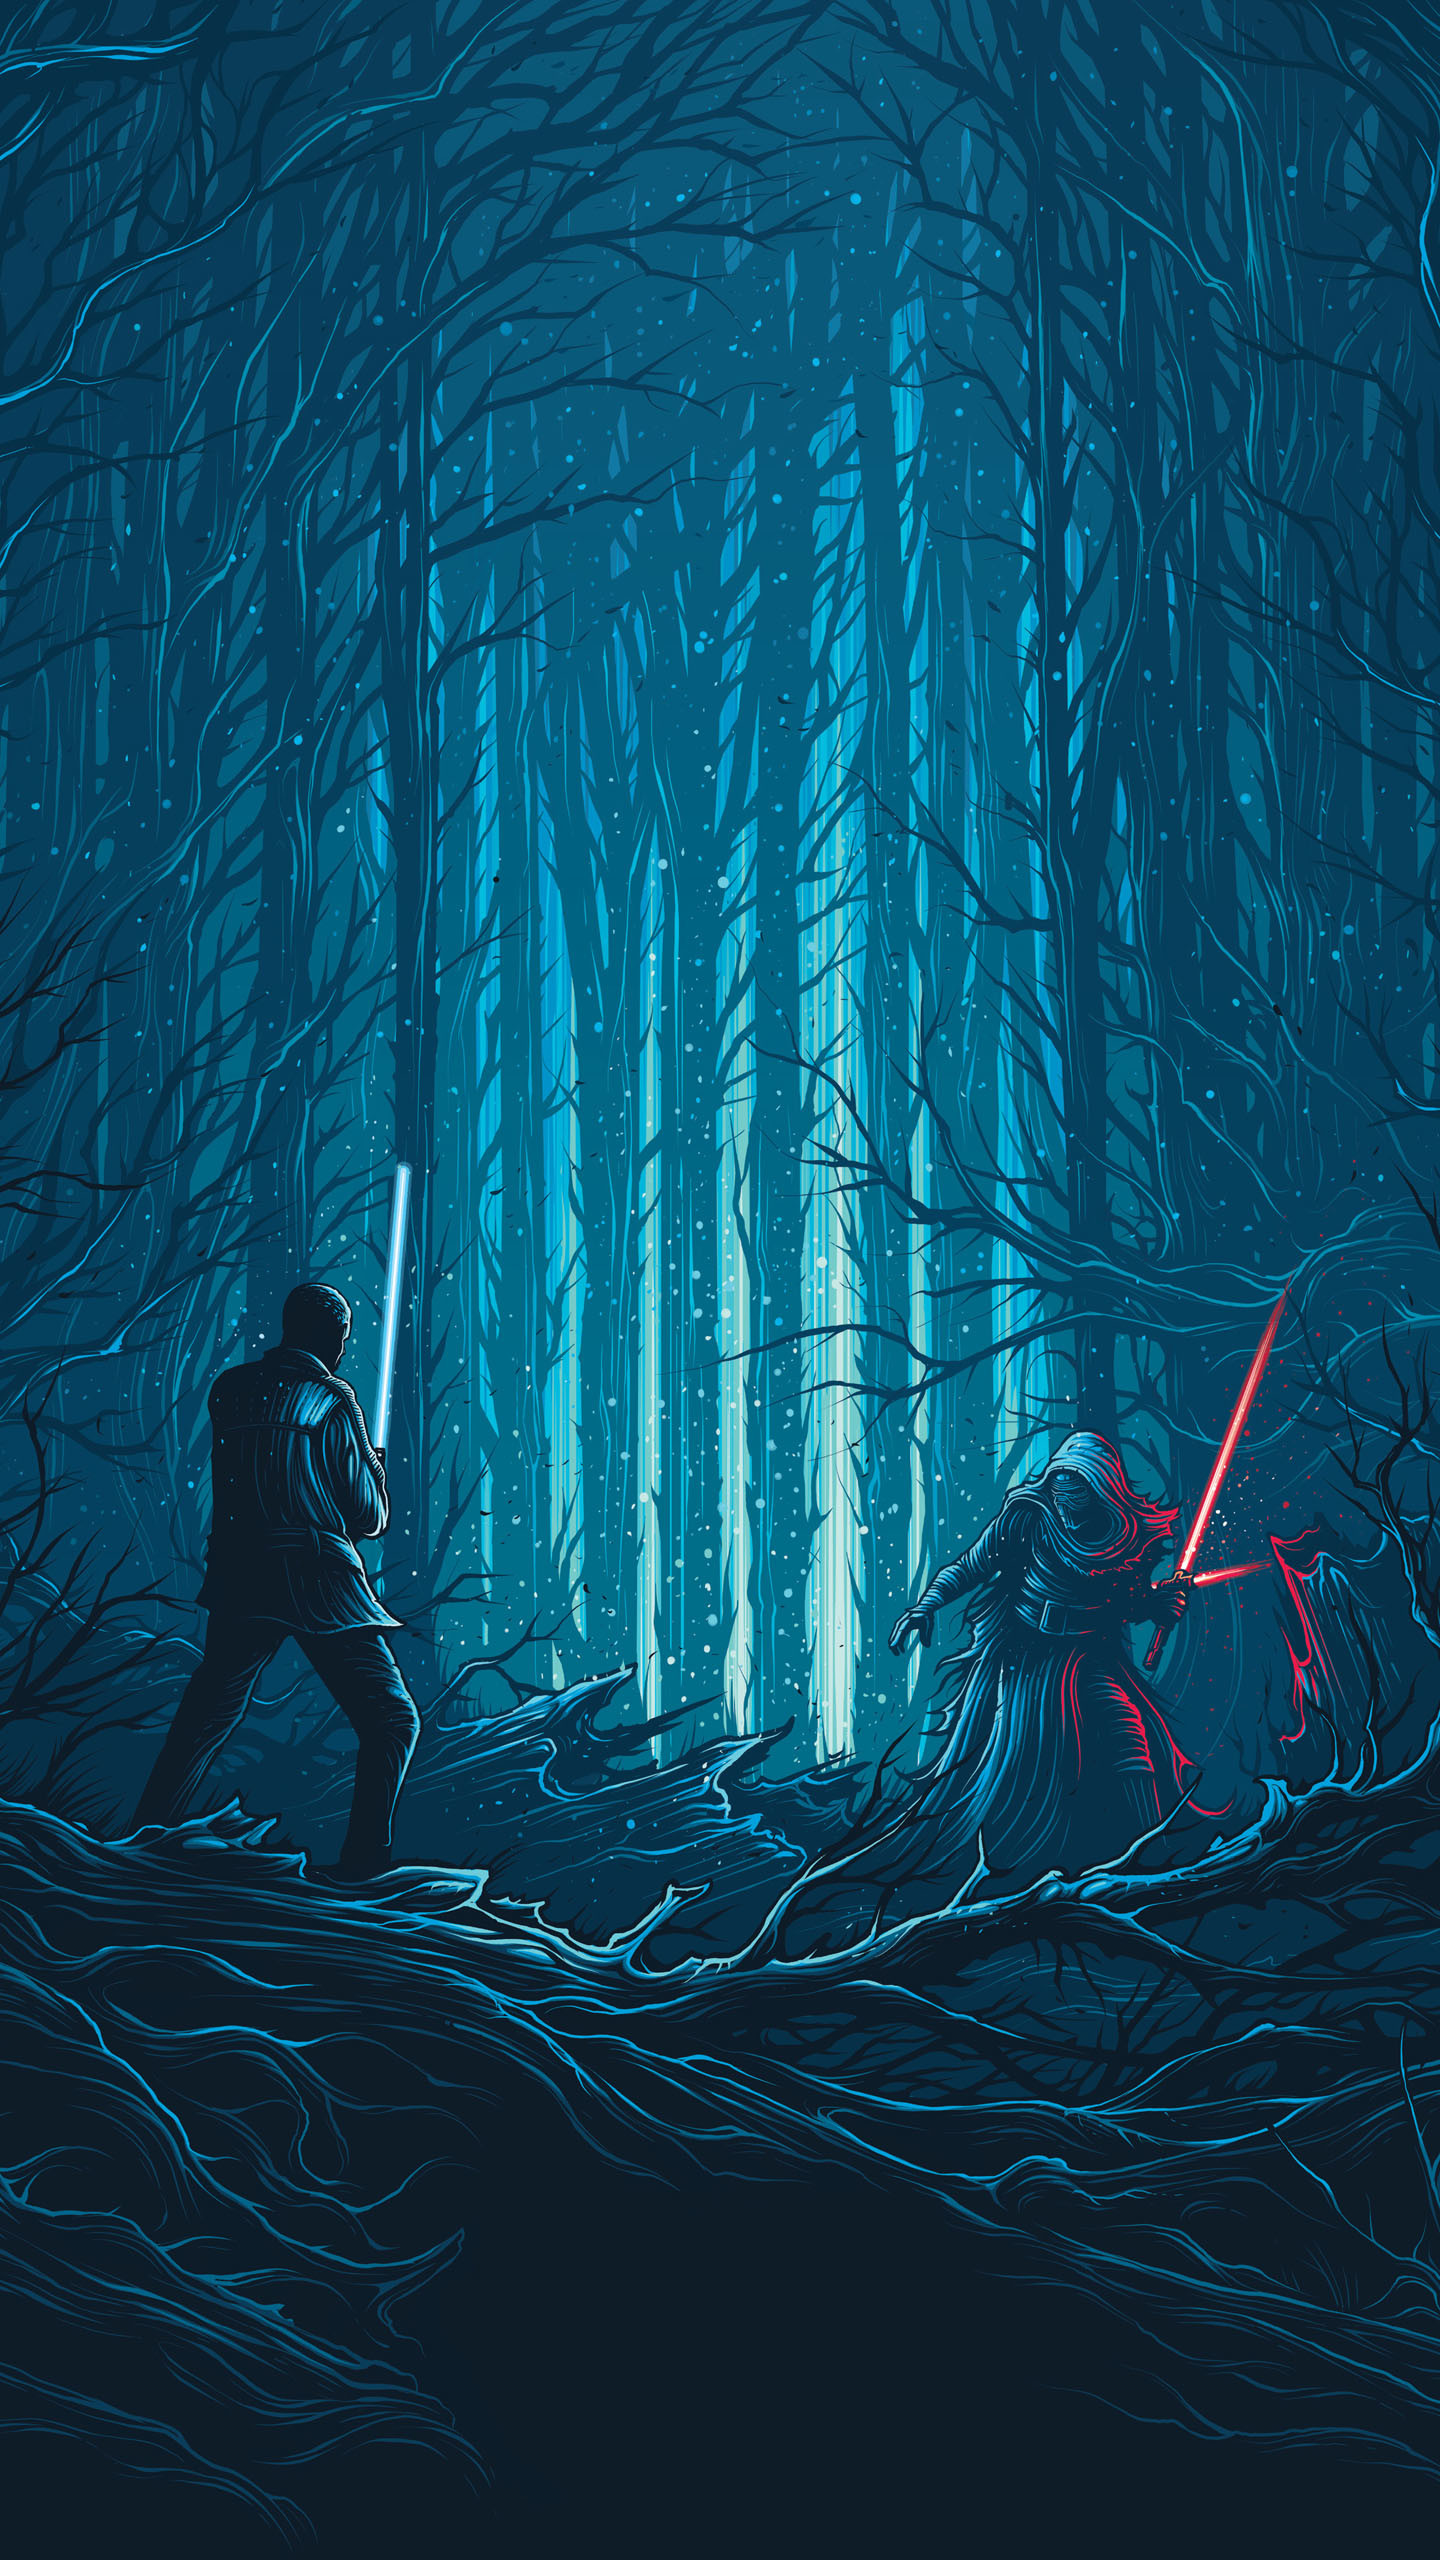 1440x2560 Star Wars: The Force Awakens wallpapers for your iPhone 6s and .